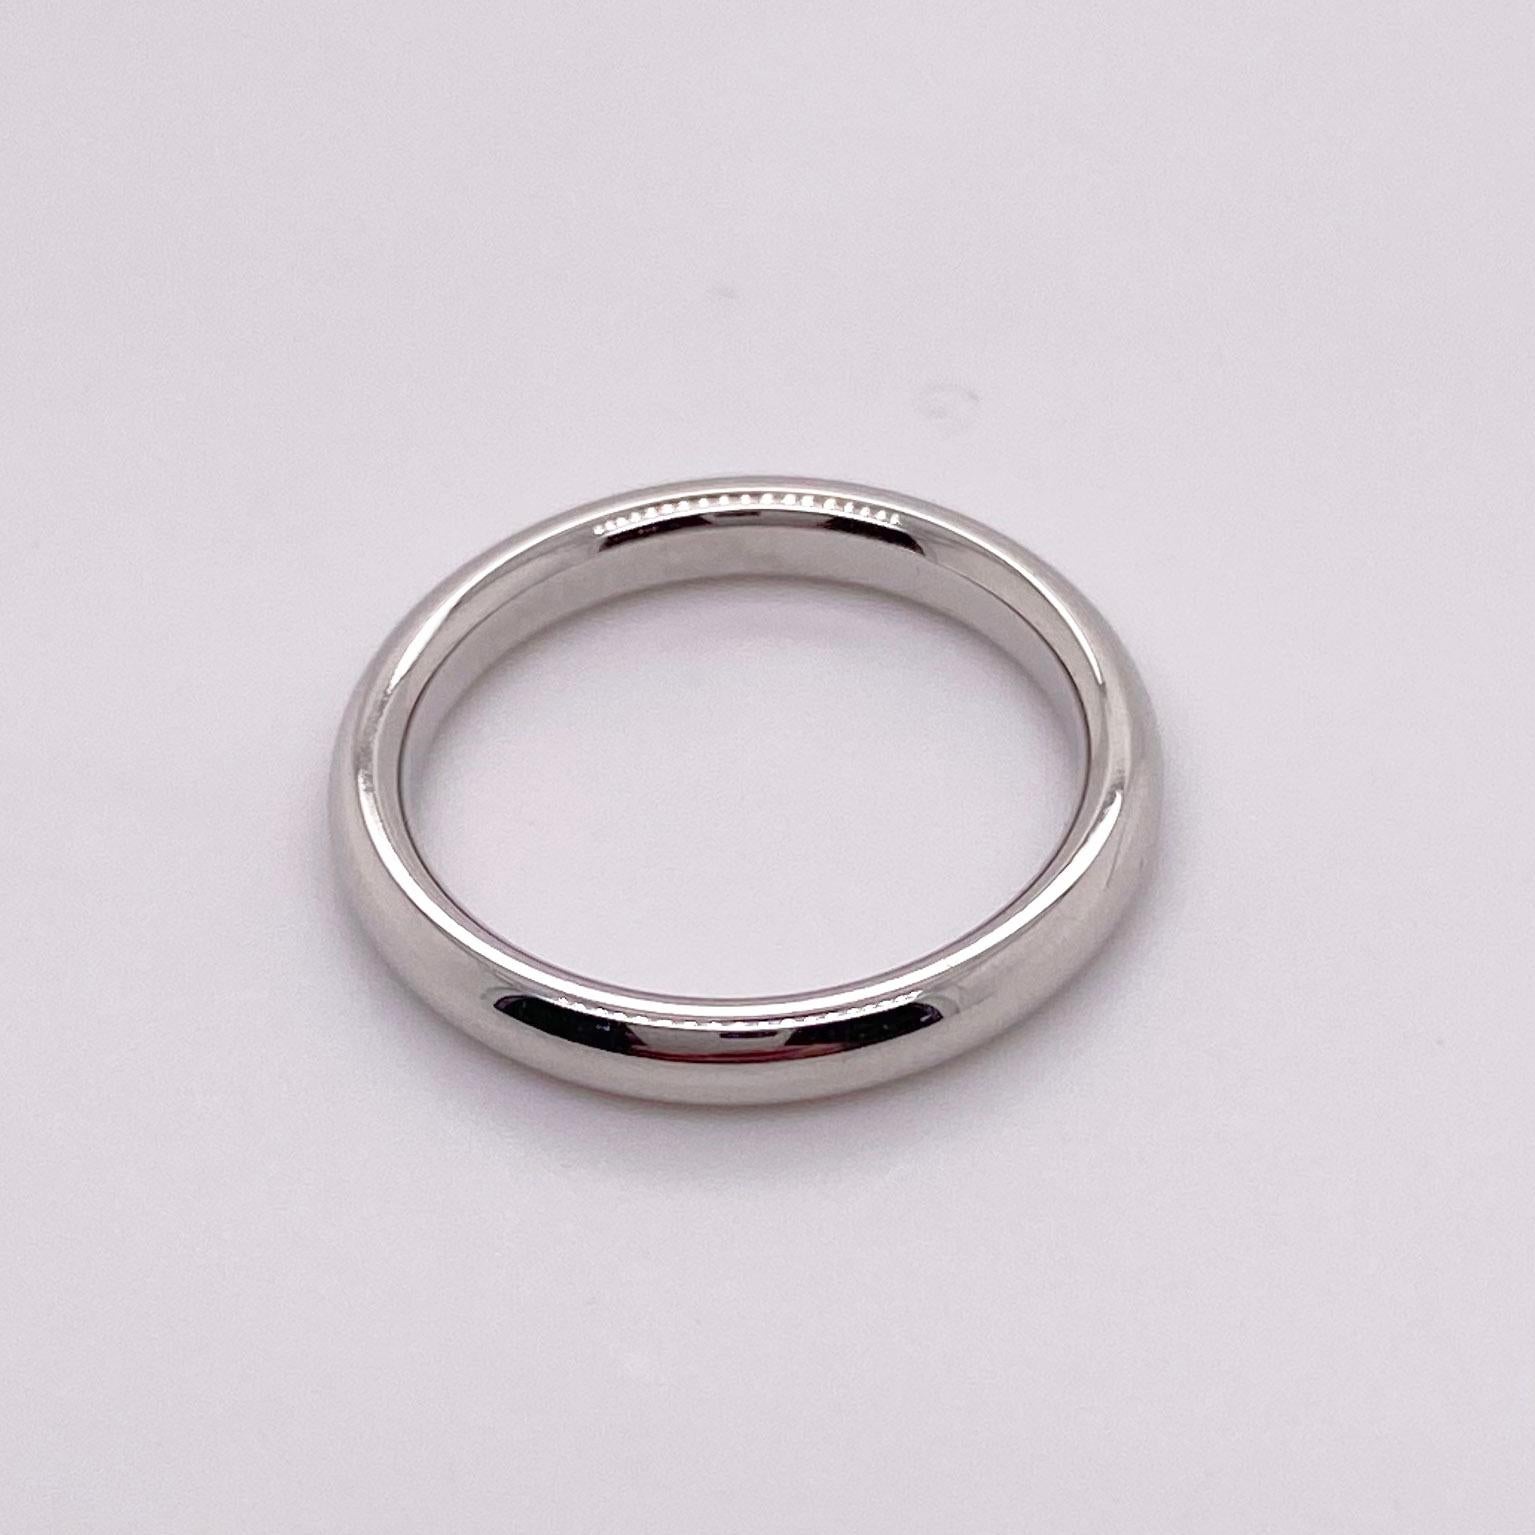 This 14 karat white gold band is 3.2 millimeters wide and is half round on the top and has comfort fit on the inside of the band. If the ring is ordered in a different size from 7.5, it would then be non-returnable. The band in the size 7.5 can be